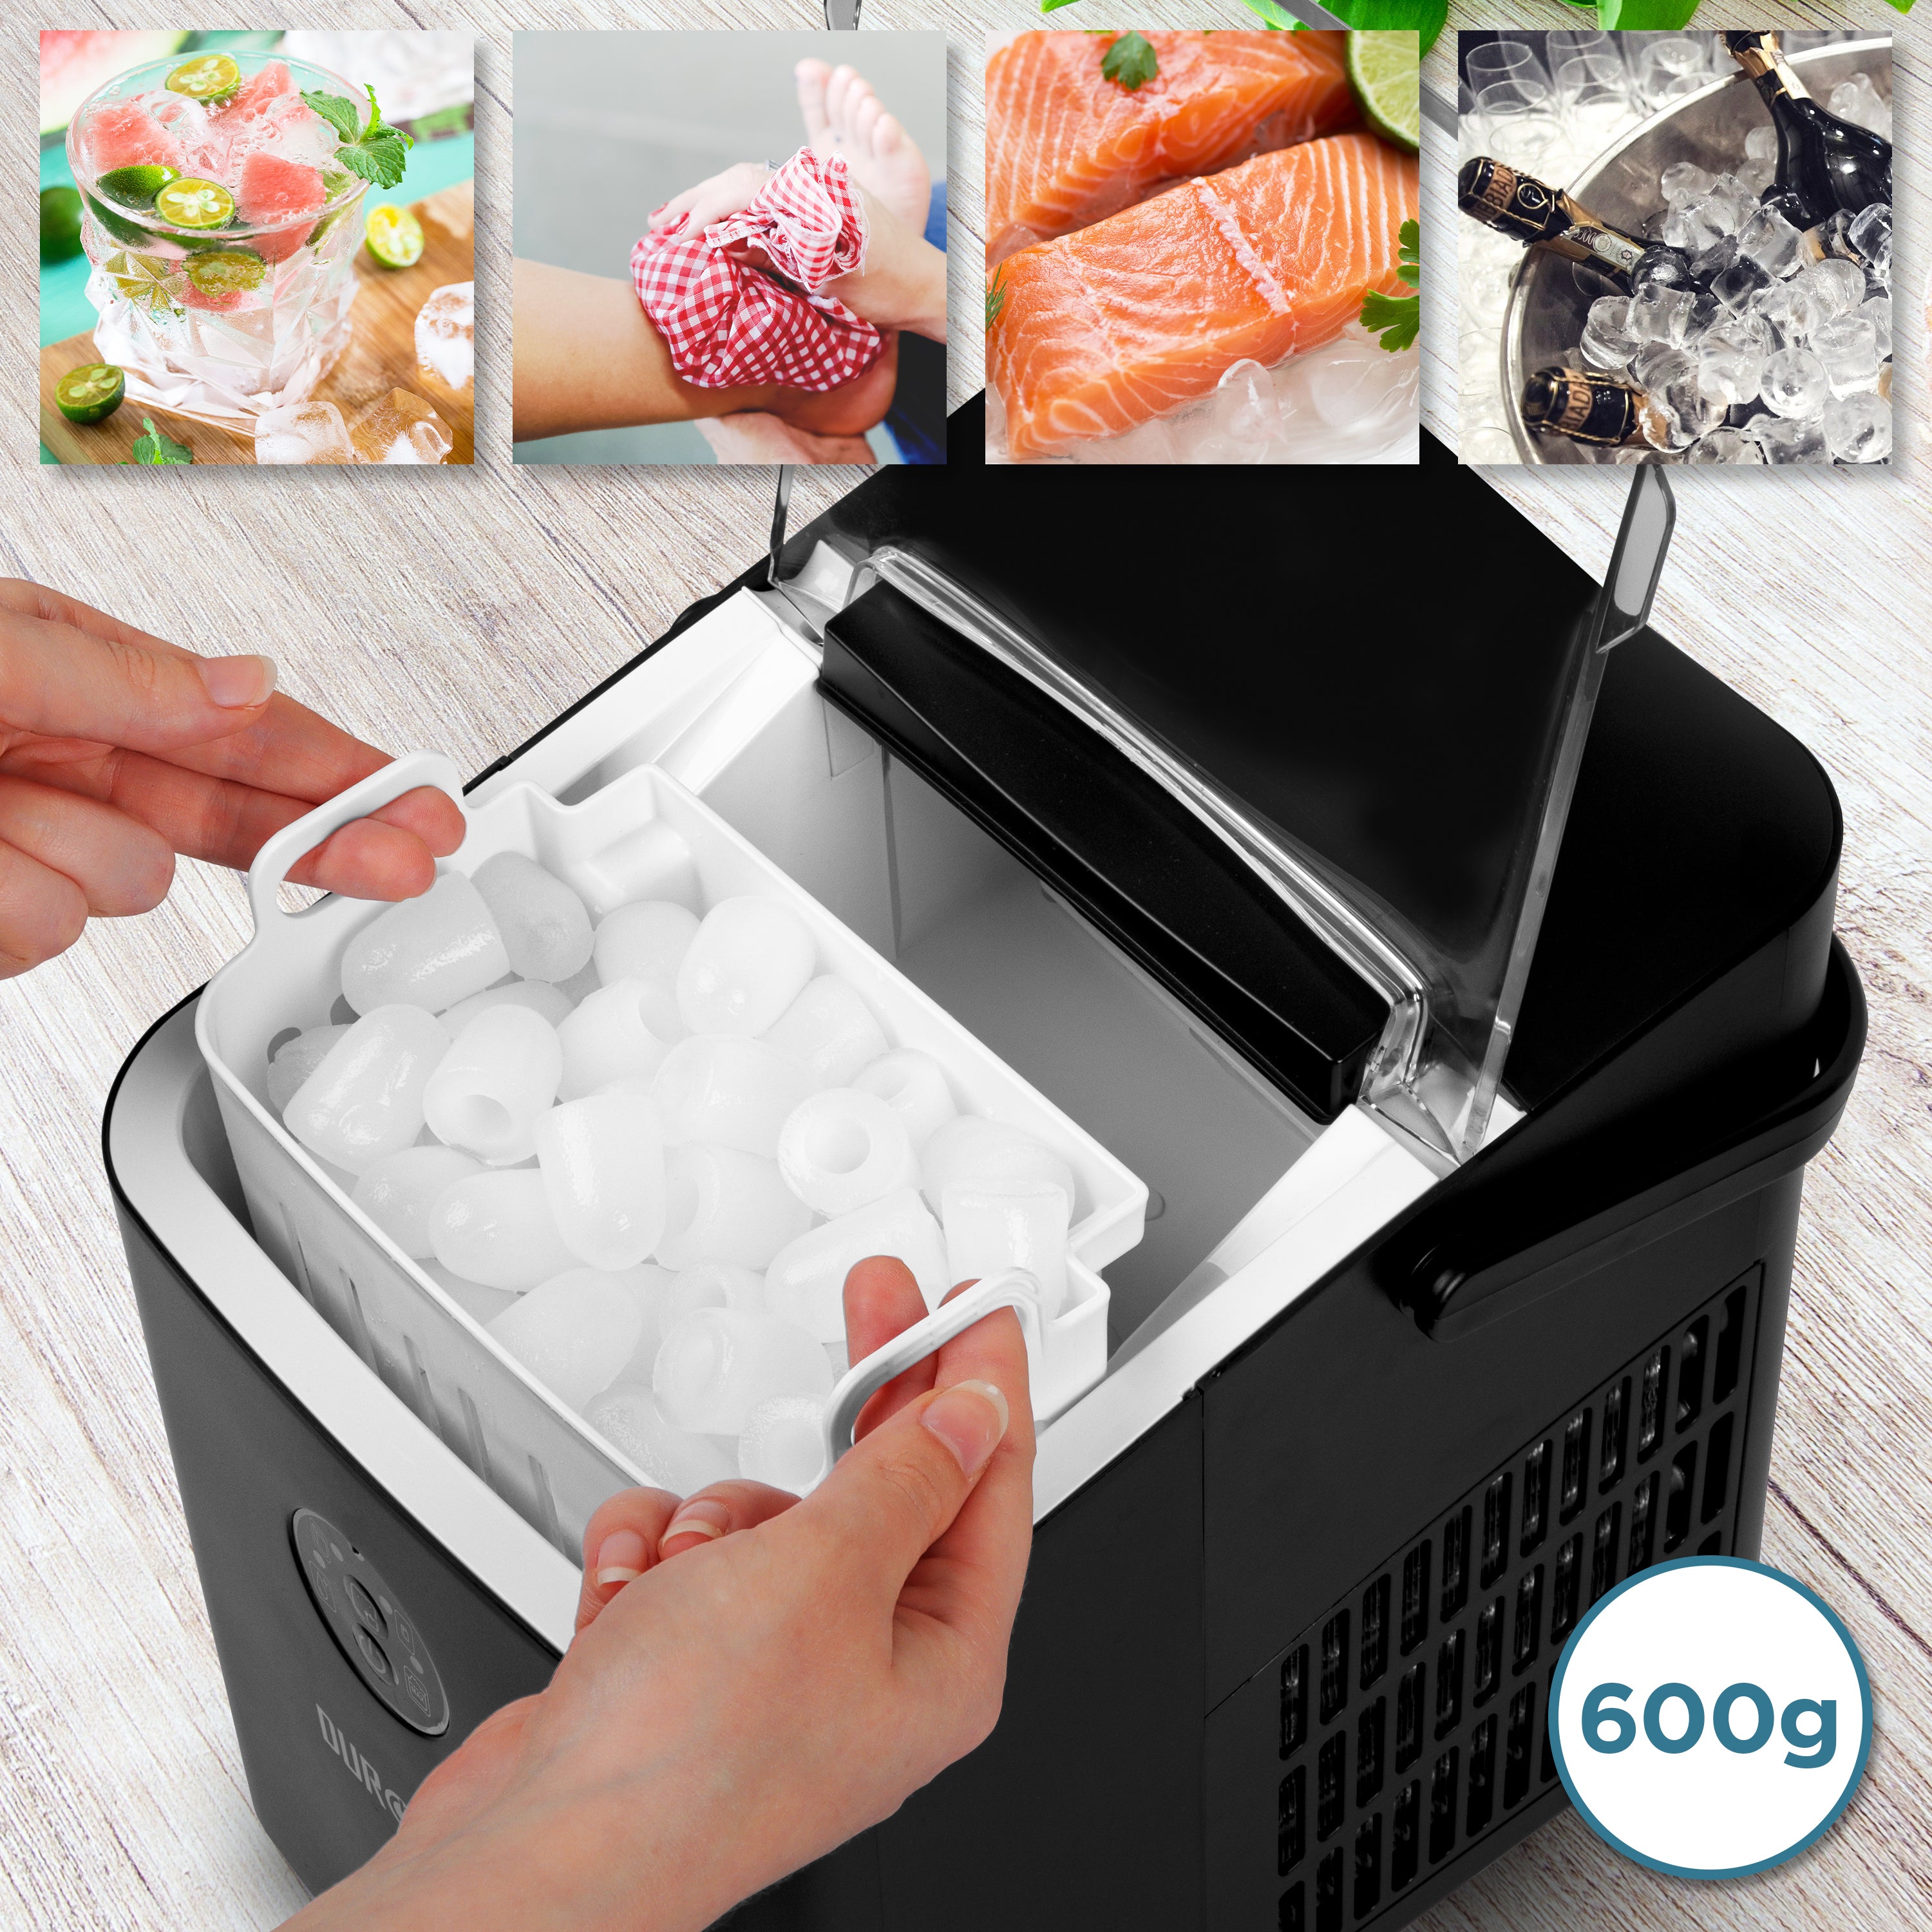 Duronic Countertop Ice Maker Machine ICM12 BK, 8 Cubes in 6 Minutes, Up To 12kg Ice Cubes Daily, 120W Self Cleaning Ice Machine With 1L Tank, Ice Scoop and Basket for Home,Office, Bar